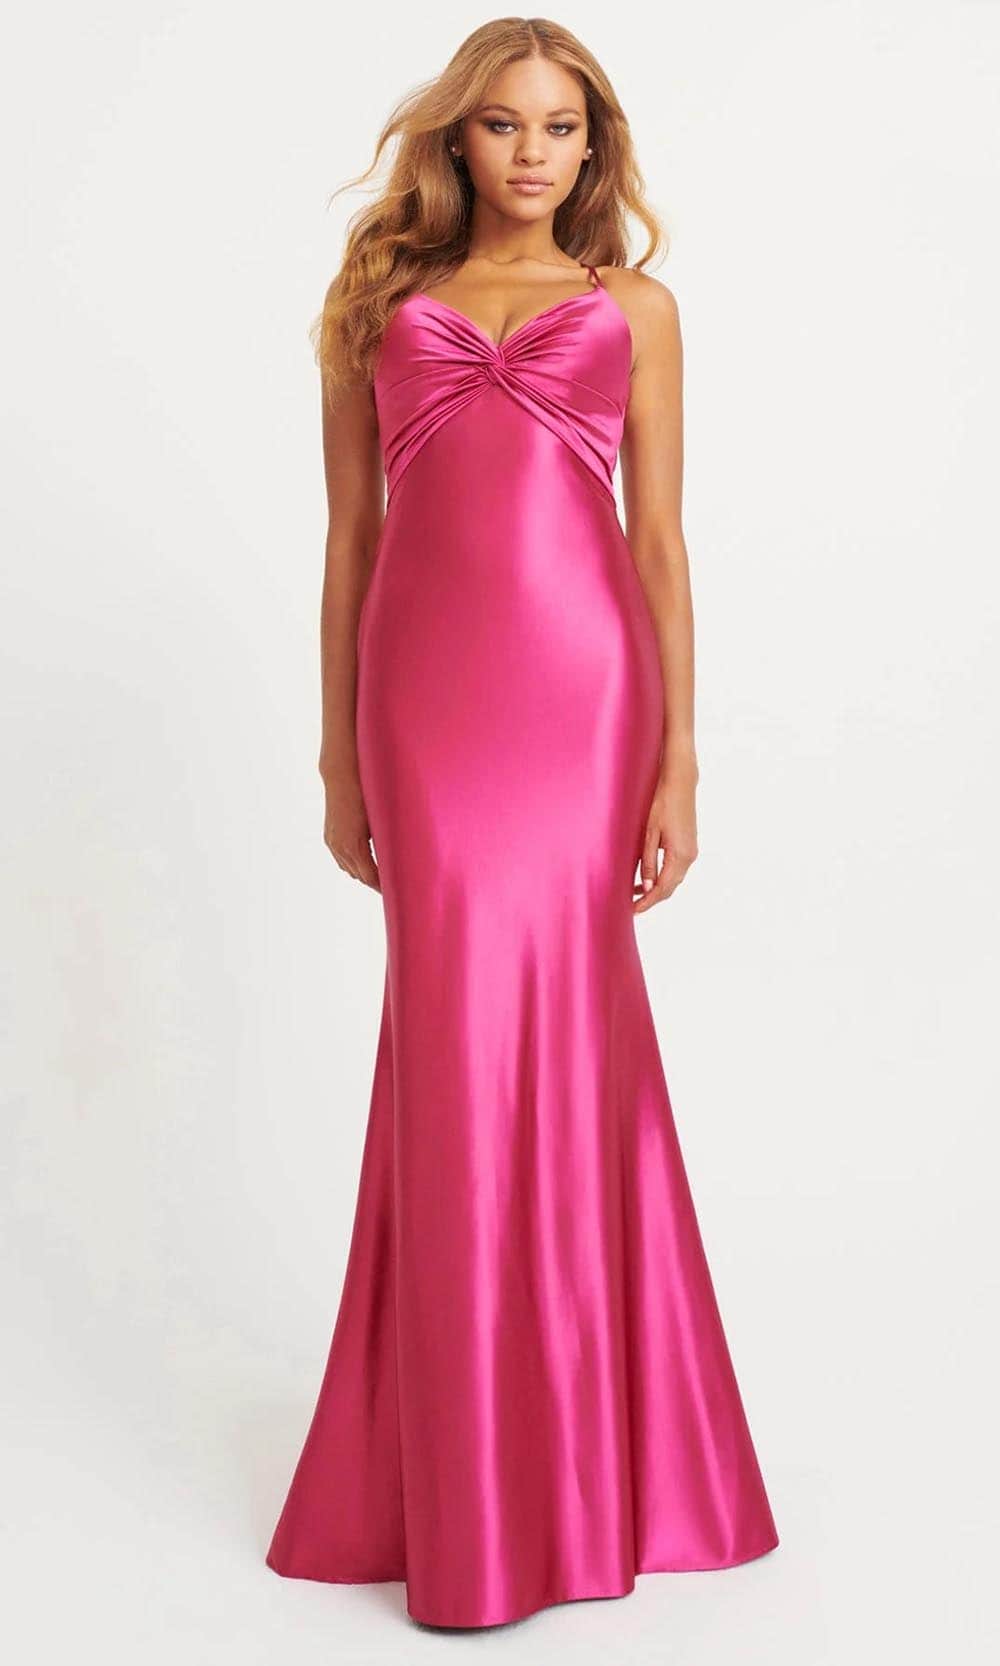 Image of Faviana 11034 - Knotted V-Neck Satin Prom Gown